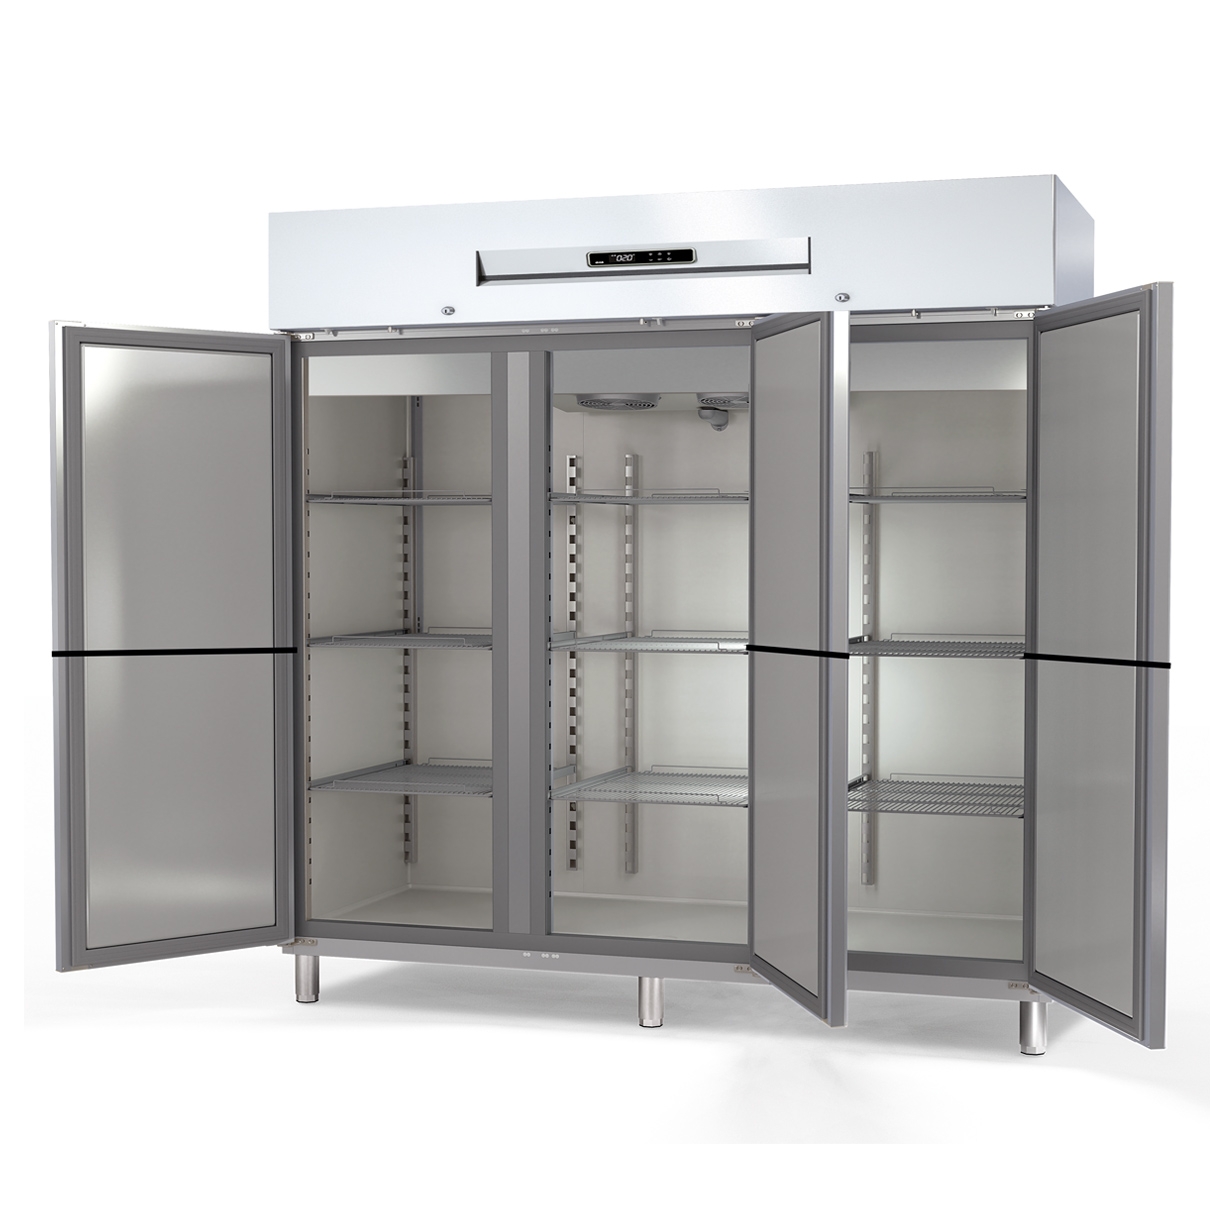 Gastronorm 2/1 Refrigerated Cabinet ARG-210-6